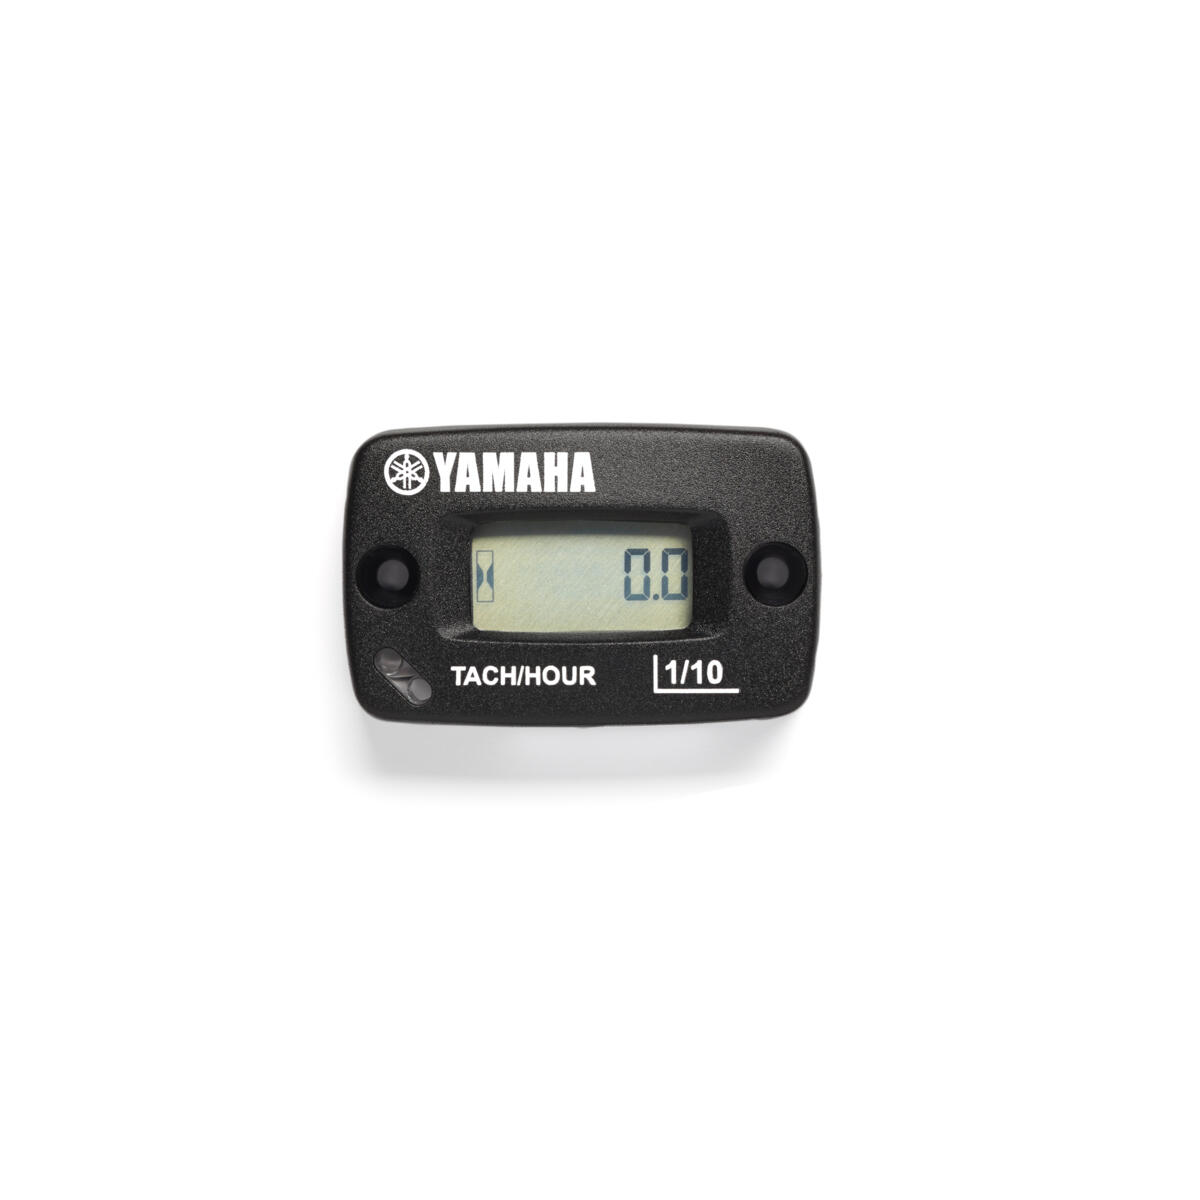 Meter to help you to keep track of your engine's operating hours.